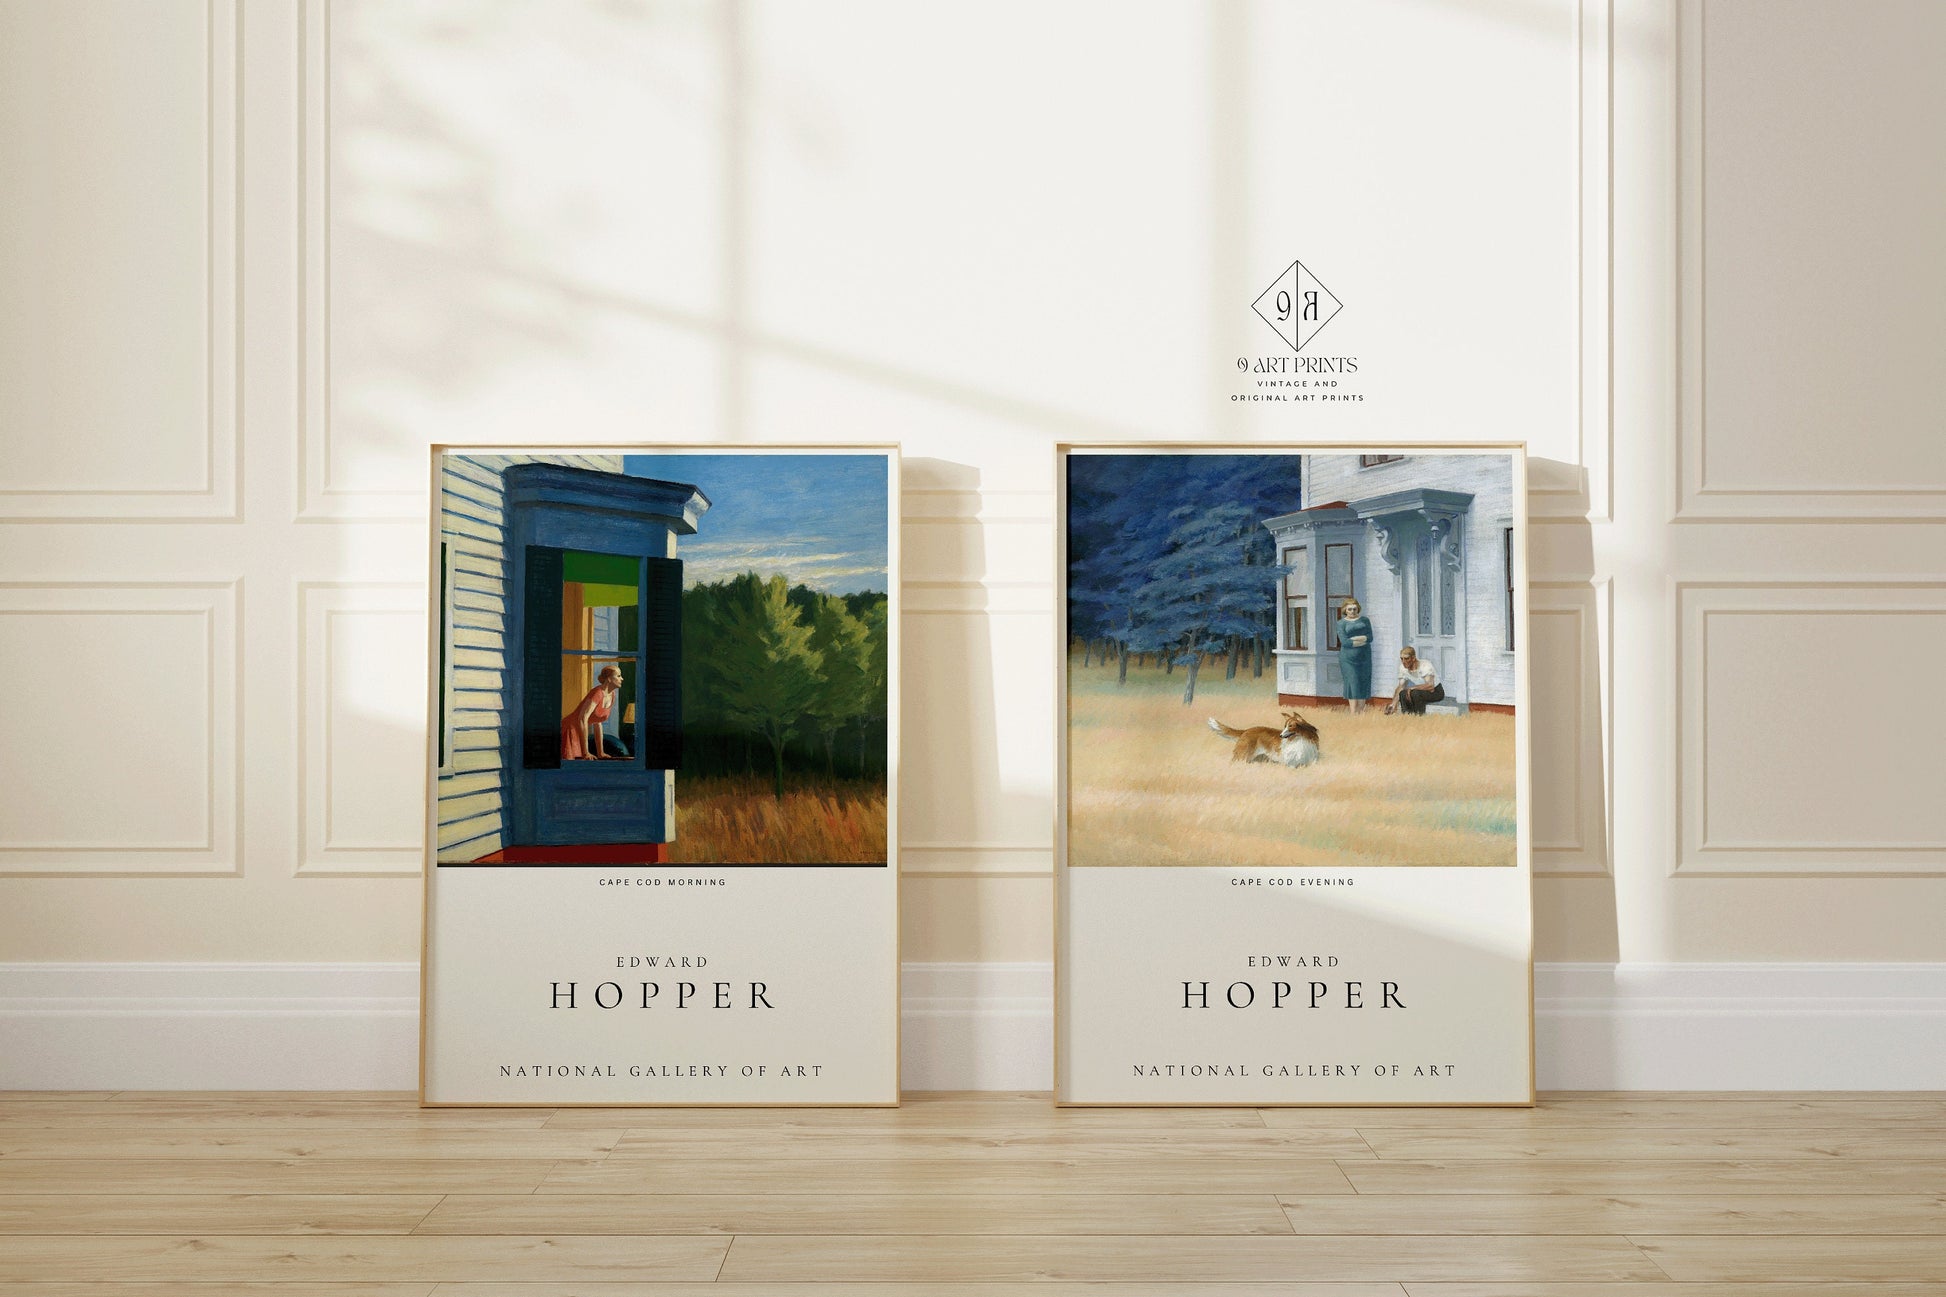 Set of 2 Edward Hopper Prints Cape Cod Morning and Evening Museum Exhibition Poster American Realist Framed Ready to Hang Home Office Decor